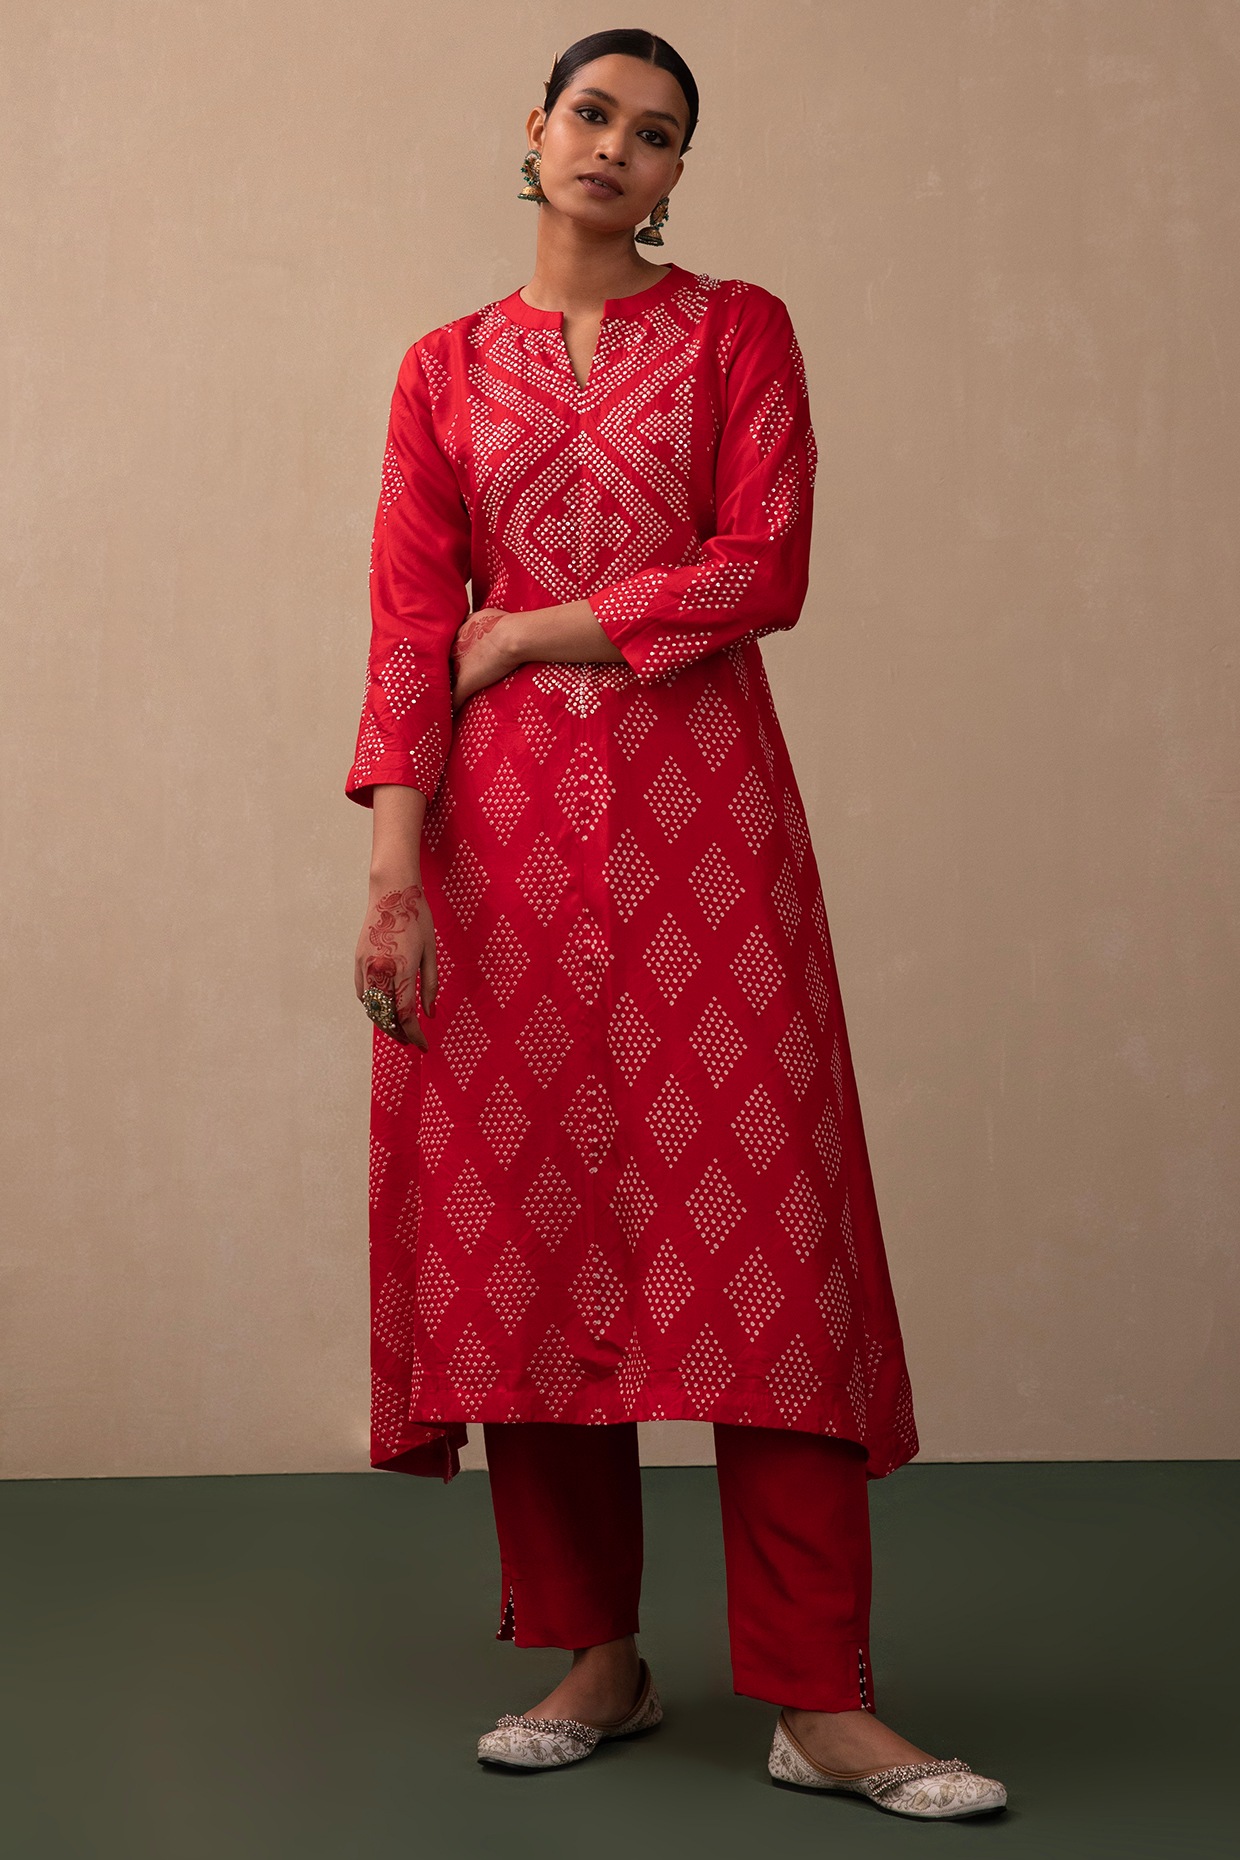 Complete your look with Elegant Silk Kurti Designs | Libas